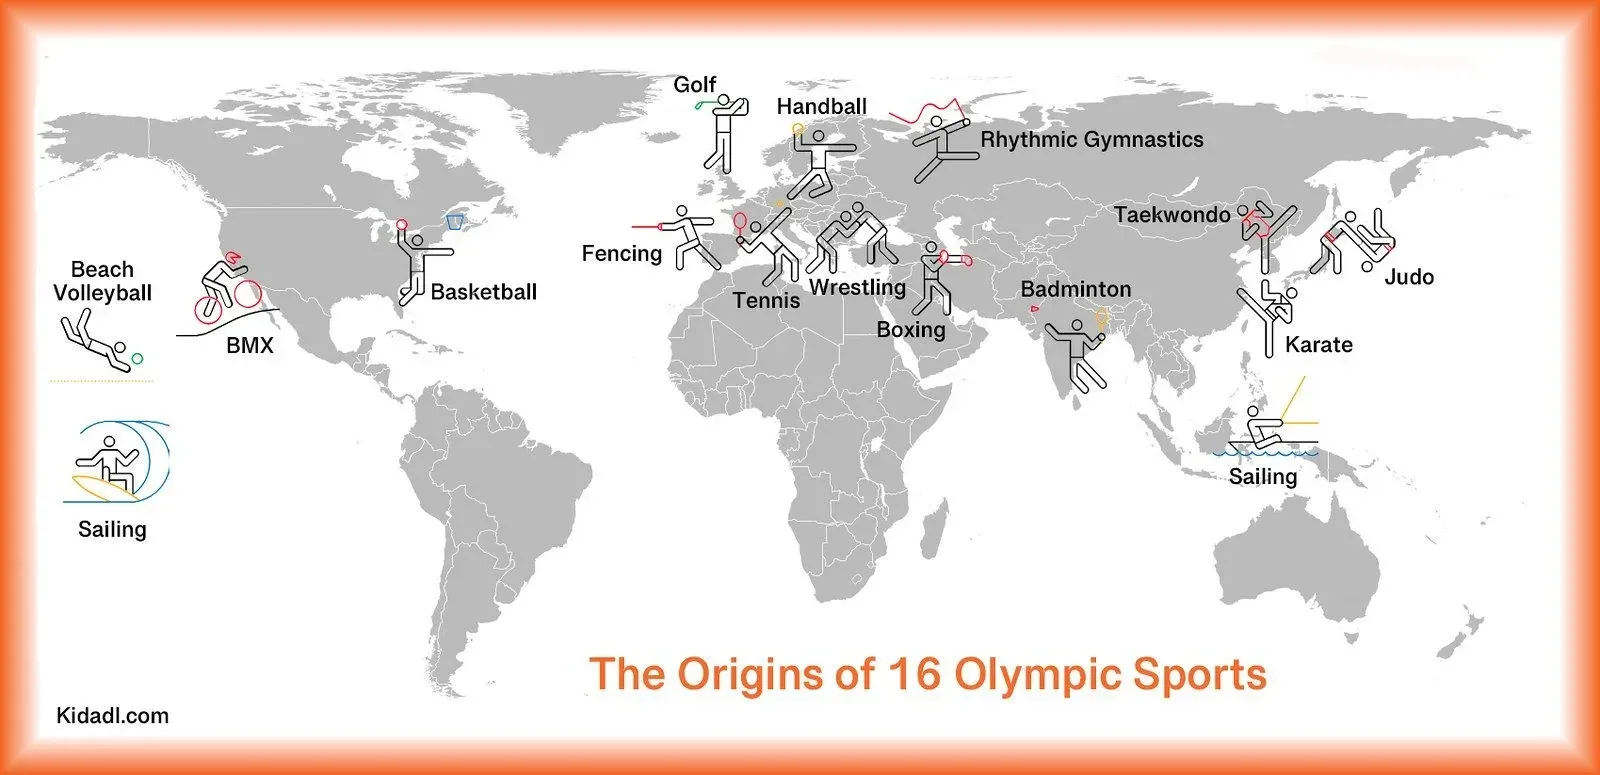 The summer Olympics brings together athletes from almost every nation